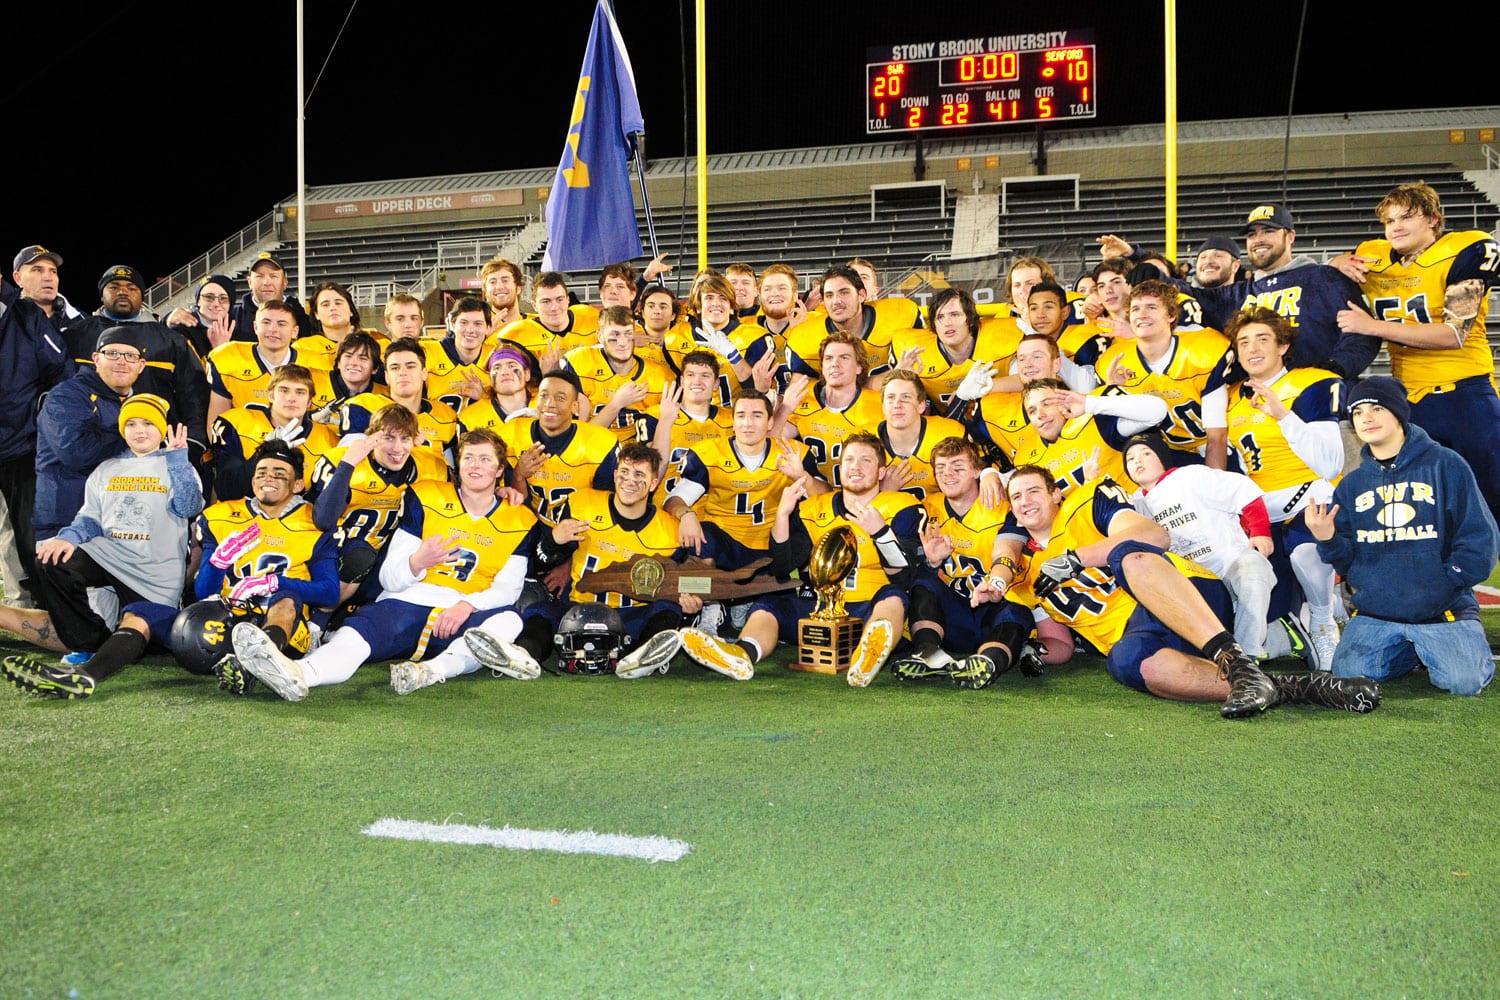 Shoreham-Wading River is one of just four teams, second in League IV, to win three straight Long Island titles. Photo by Bill Landon